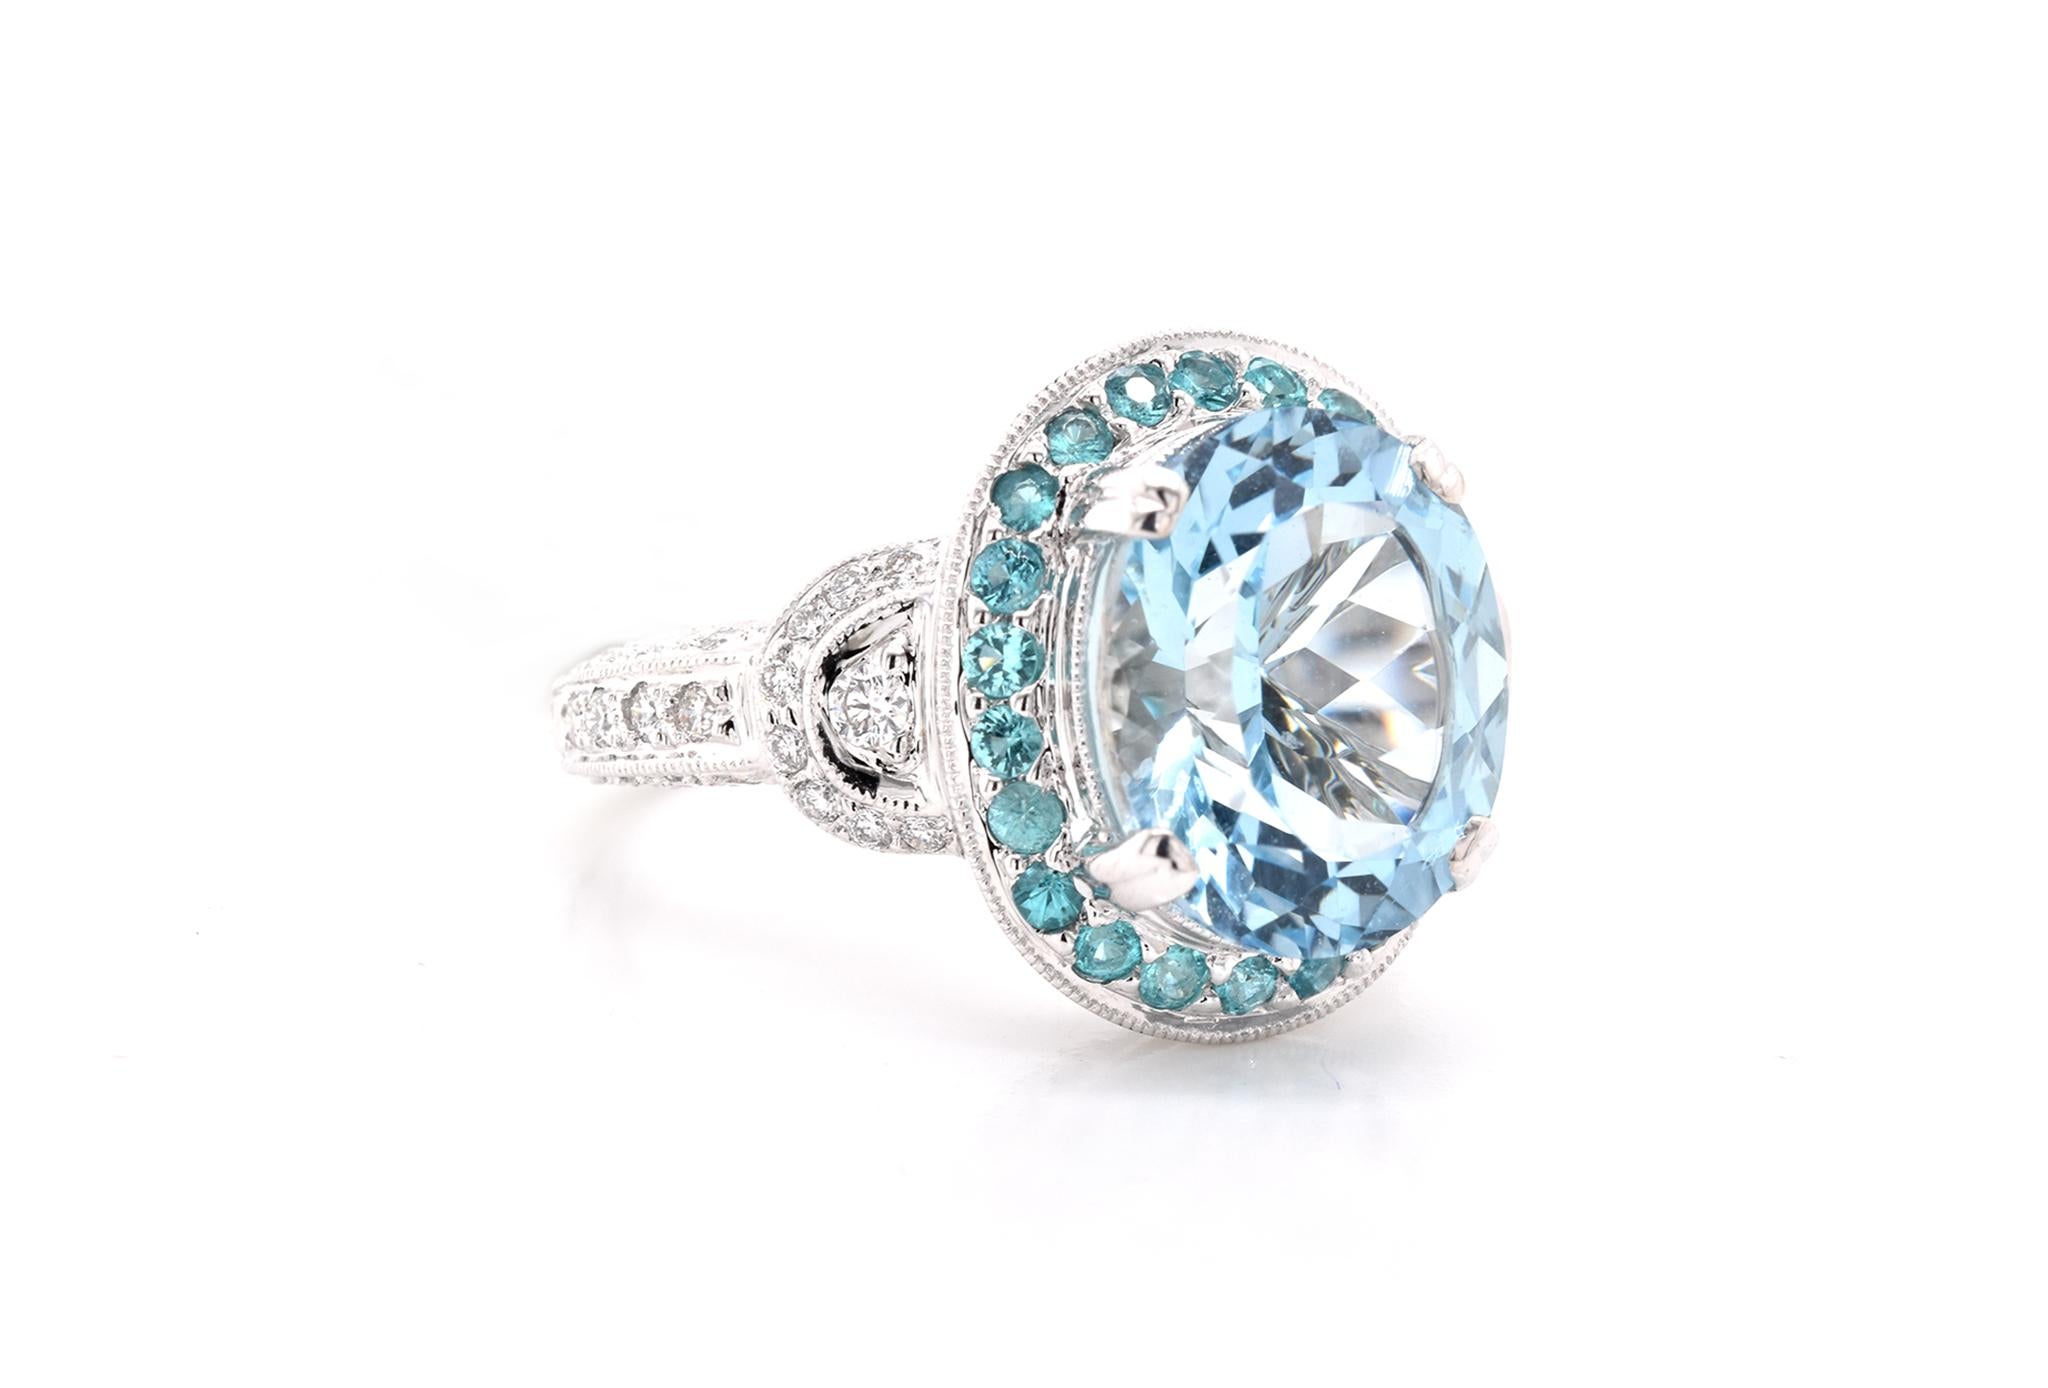 Designer: custom
Material: 18K white gold
Diamonds: 42 round brilliant cut = .38cttw 
Color: G
Clarity: VS
Aquamarine: 1 oval cut = 4.60ct
Paraiba Tourmaline: 22 round cut = .36cttw
Ring Size: 6.5 (please allow up to 2 additional business days for